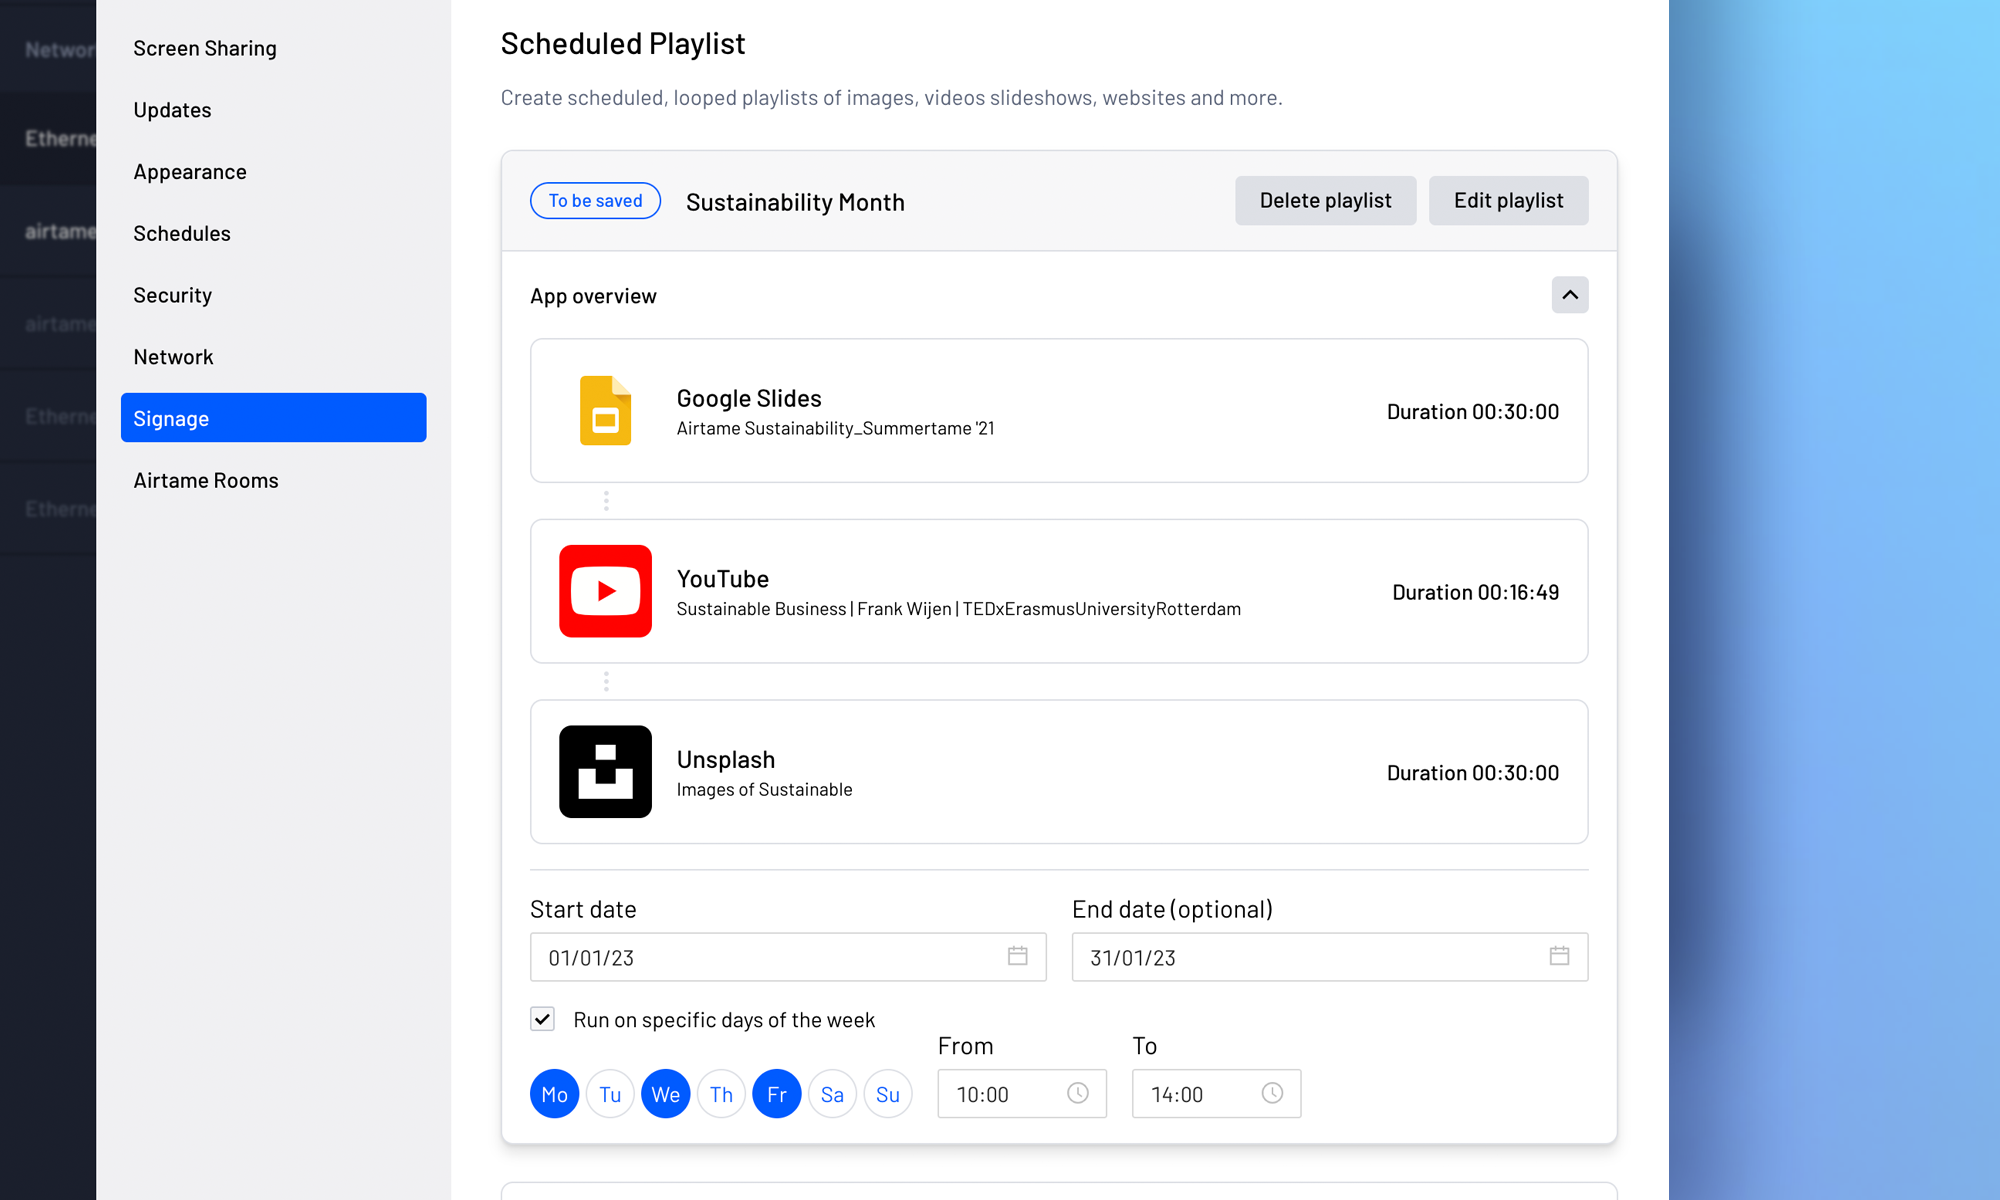 Screenshot of a feature that allows users to create and schedule playlists.